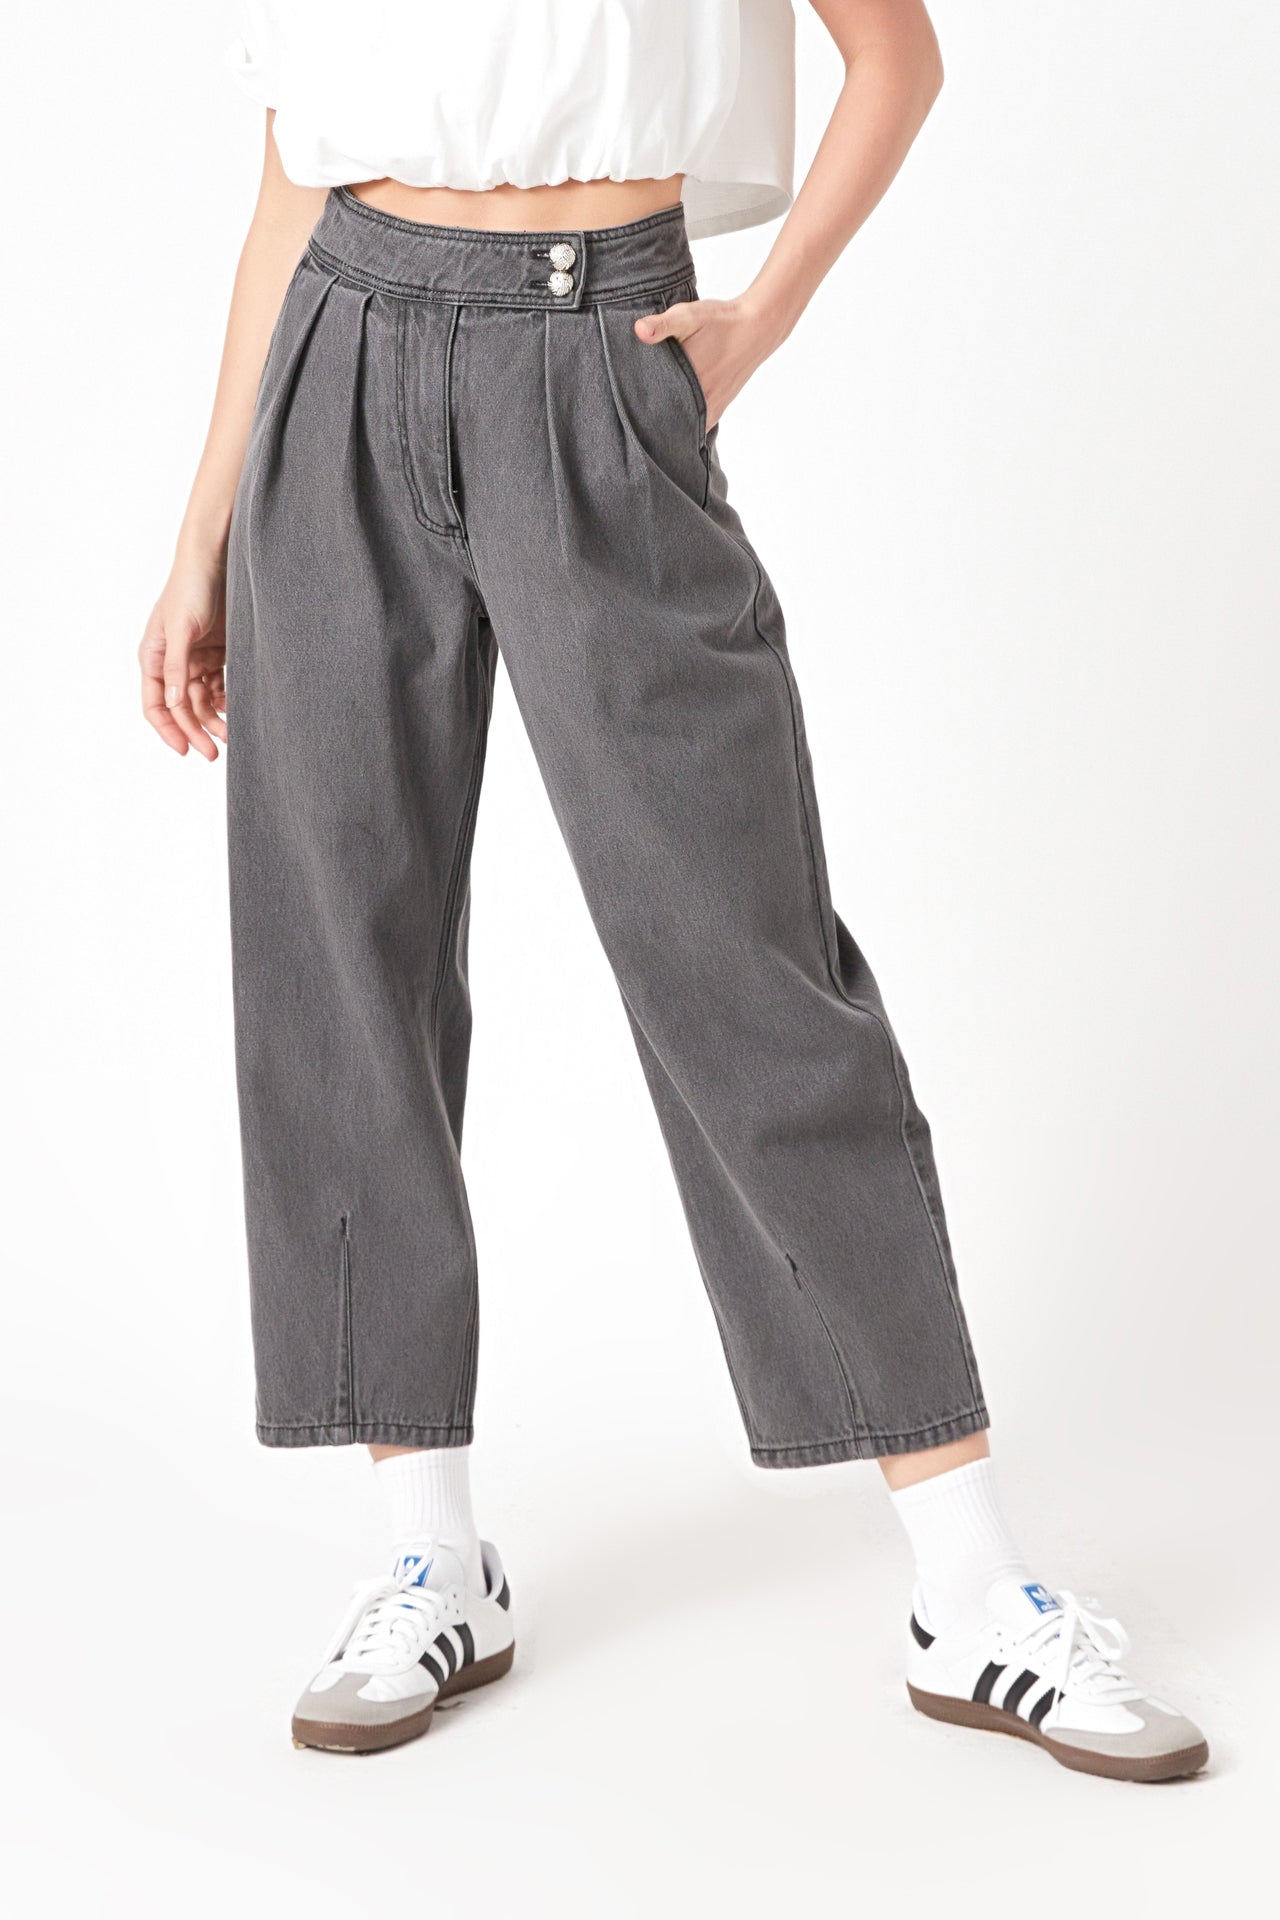 GREY LAB - Silver Straight Pants - PANTS available at Objectrare